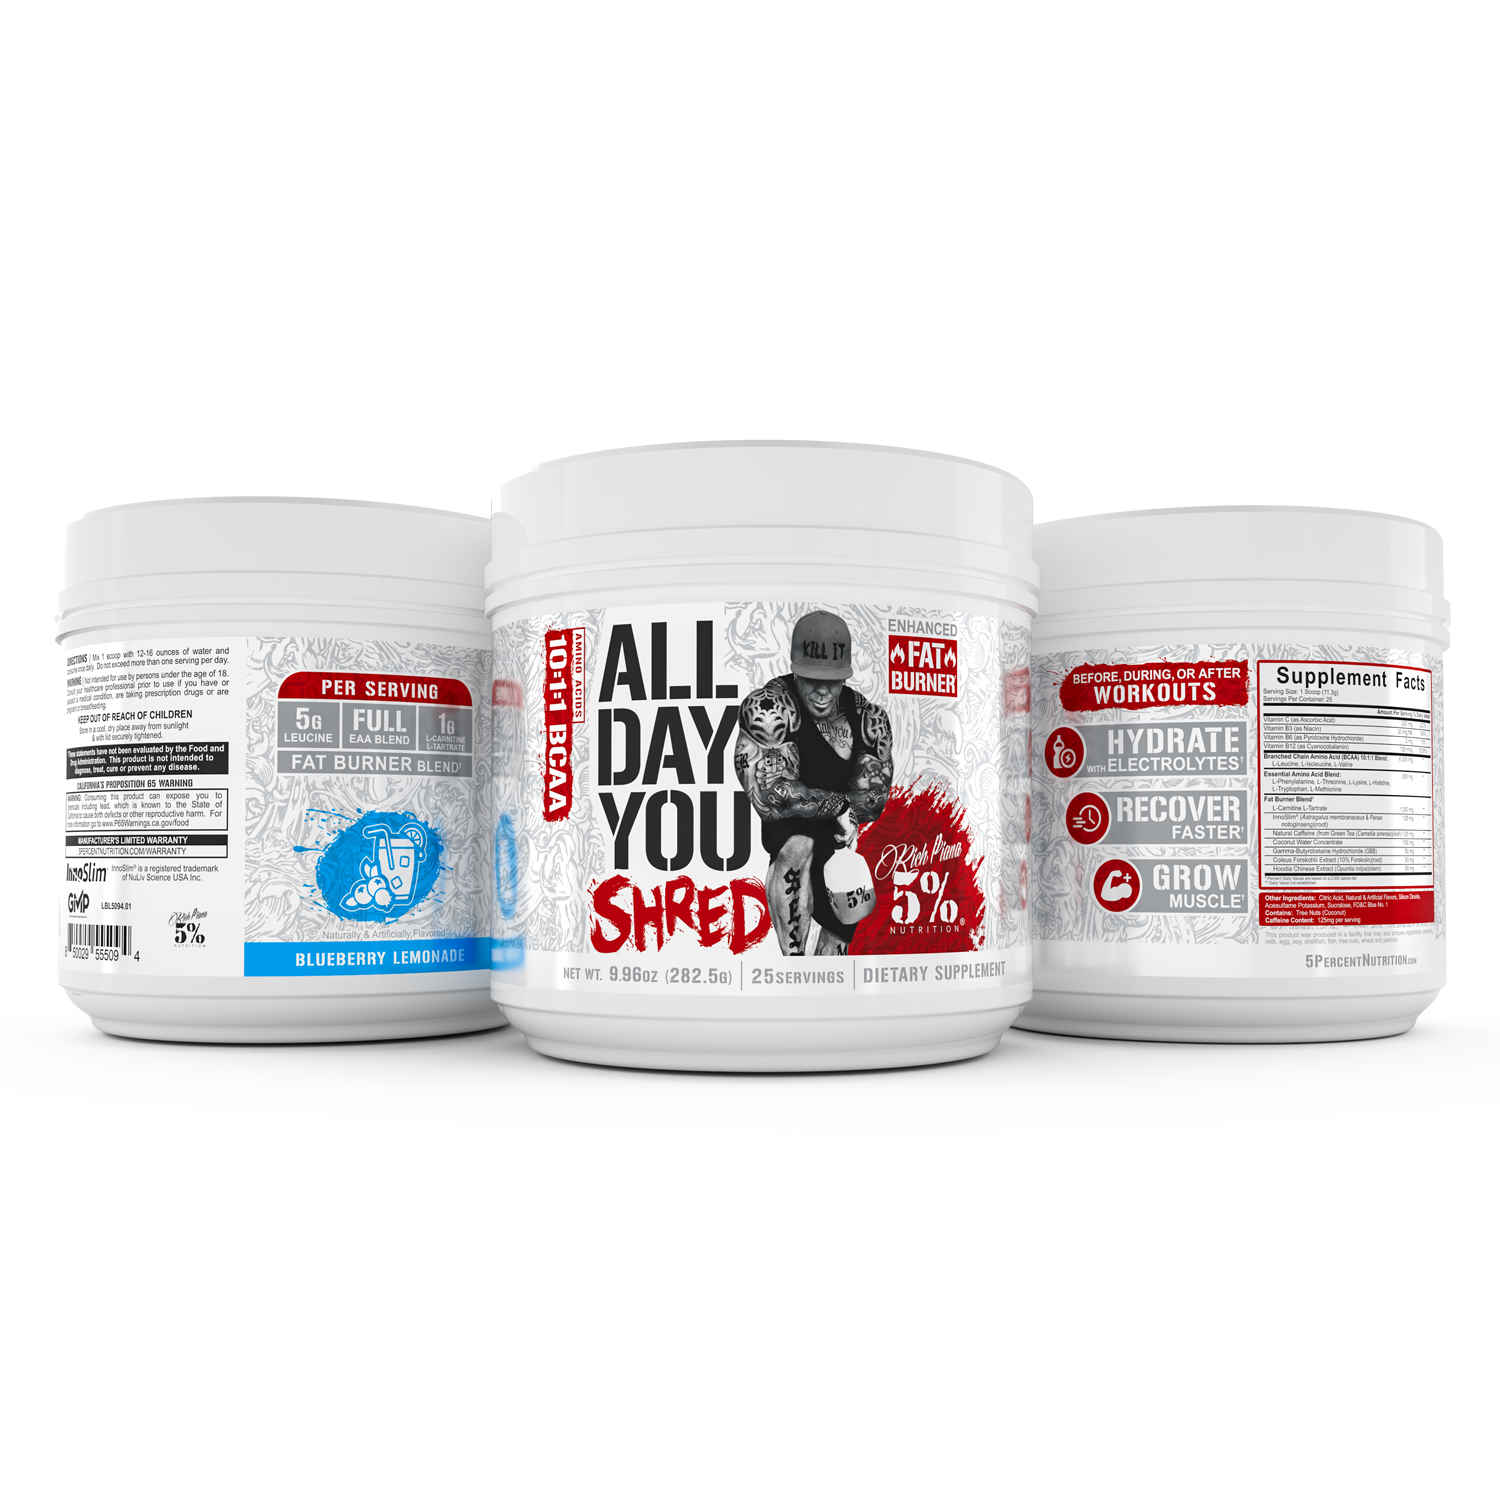 All Day You Shred Fat Burning BCAA Recovery Drink - 5% Nutrition